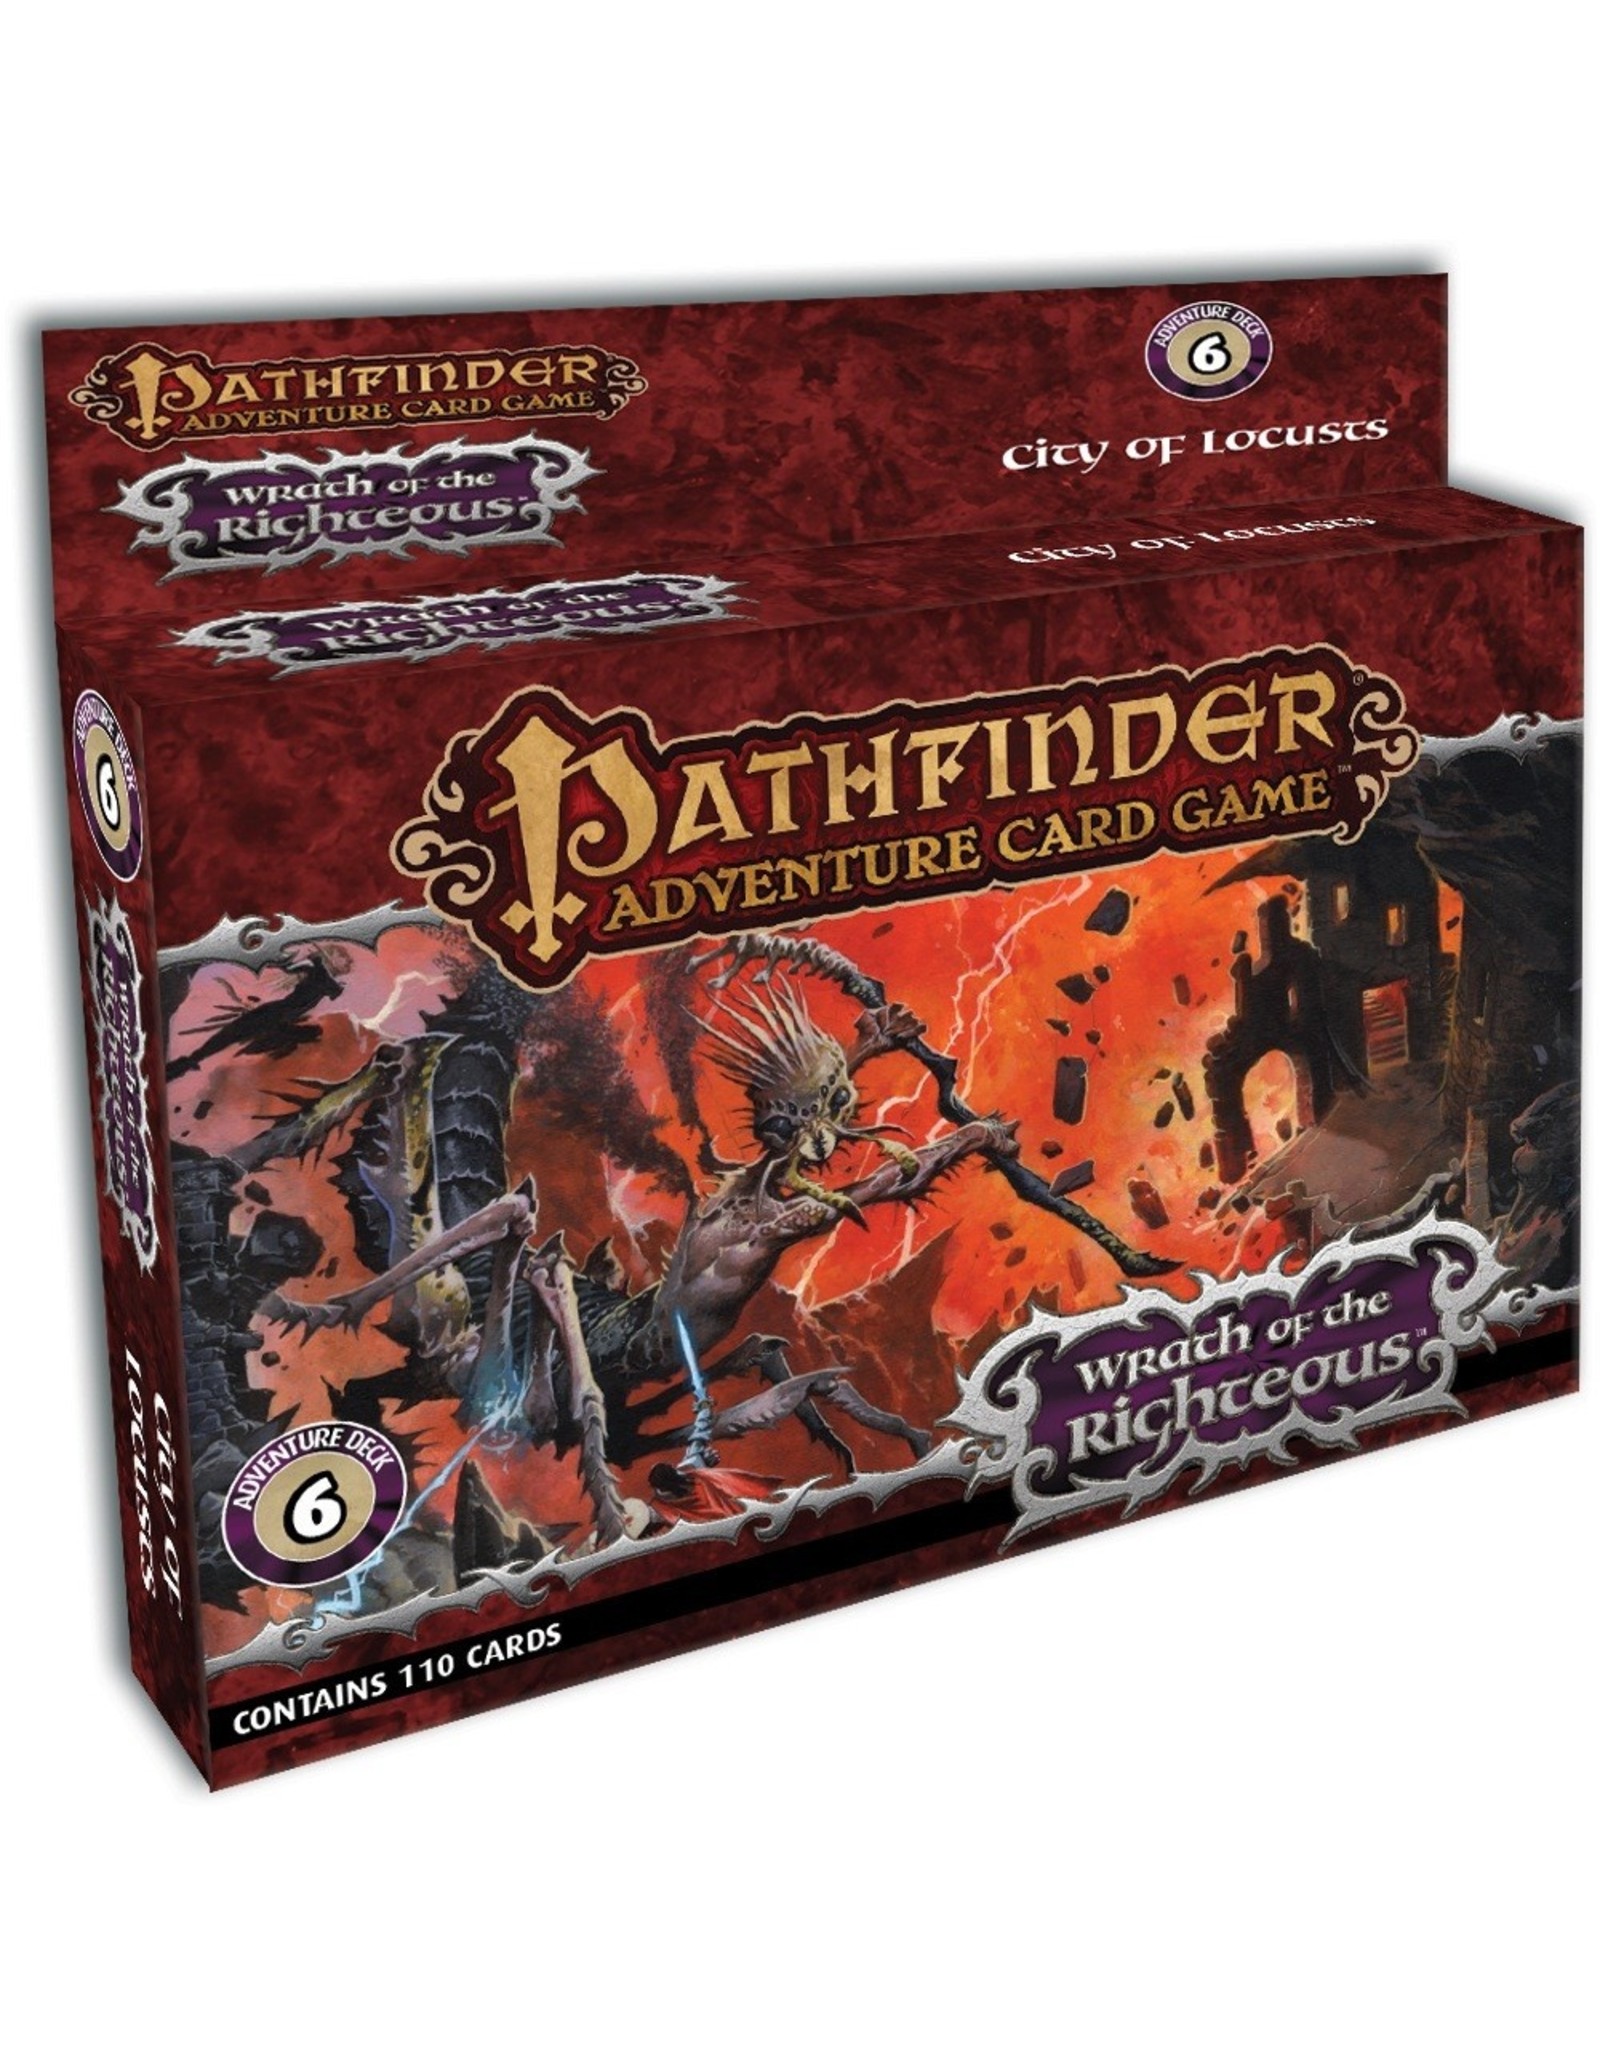 Pathfinder Adventure Card Game: Wrath of the Righteous Adventure Deck 6: City of Locusts